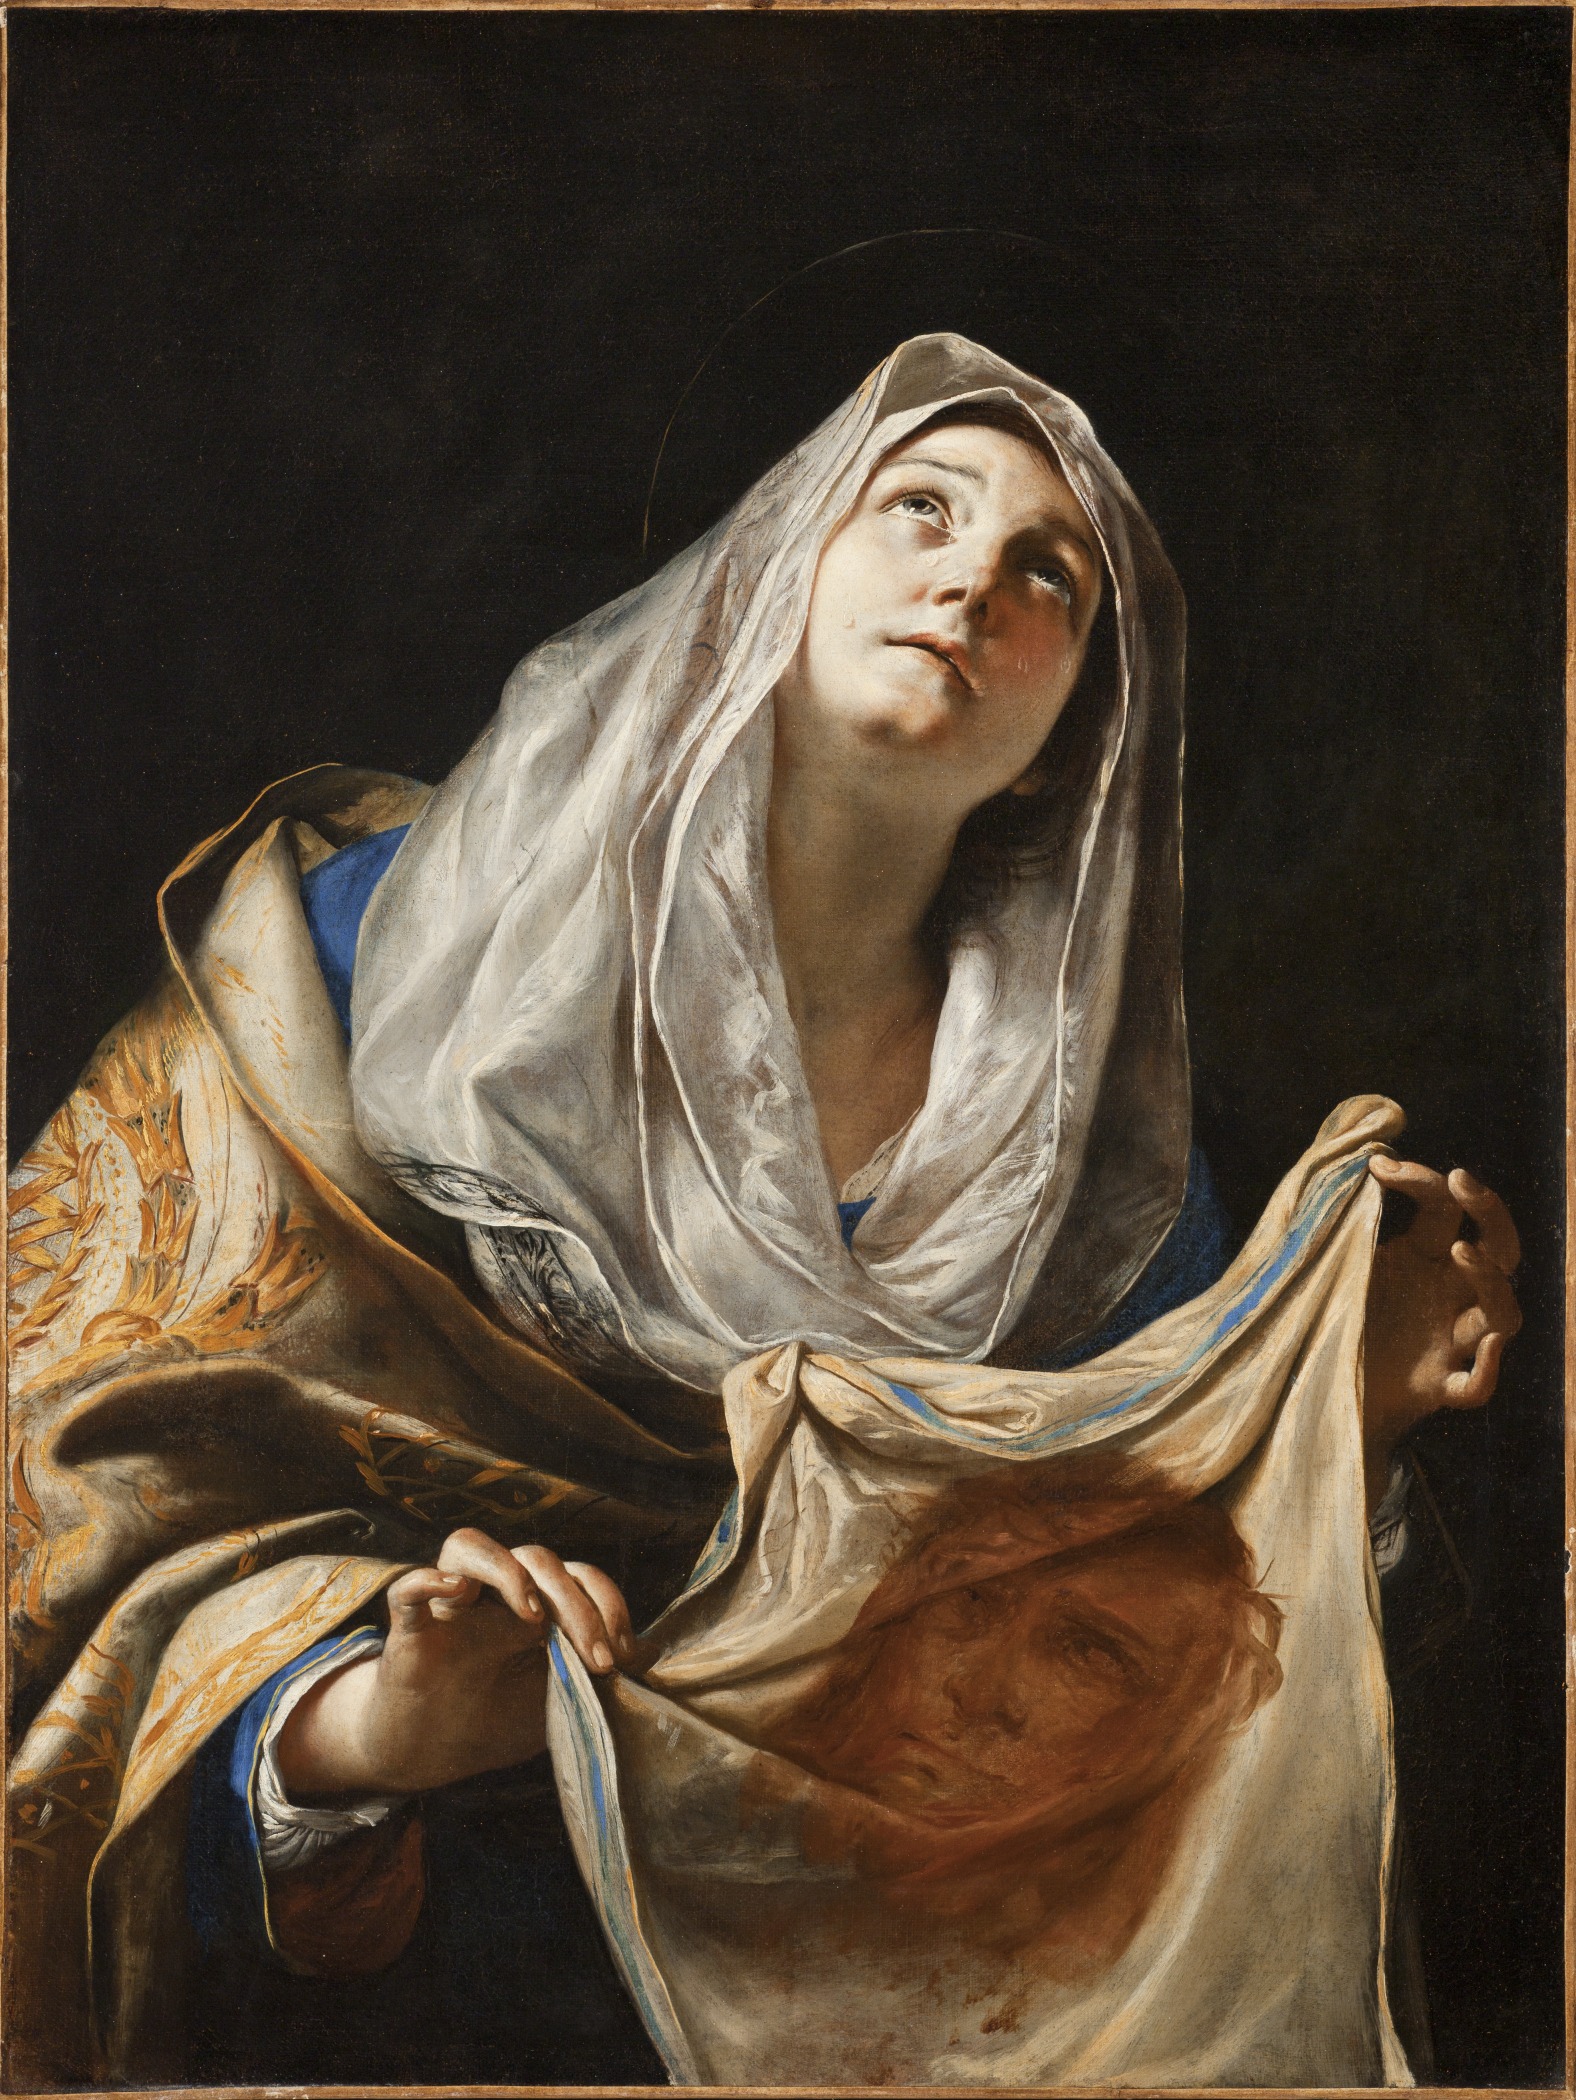 saint_veronica_with_the_veil_lacma_m.84.20_281_of_229